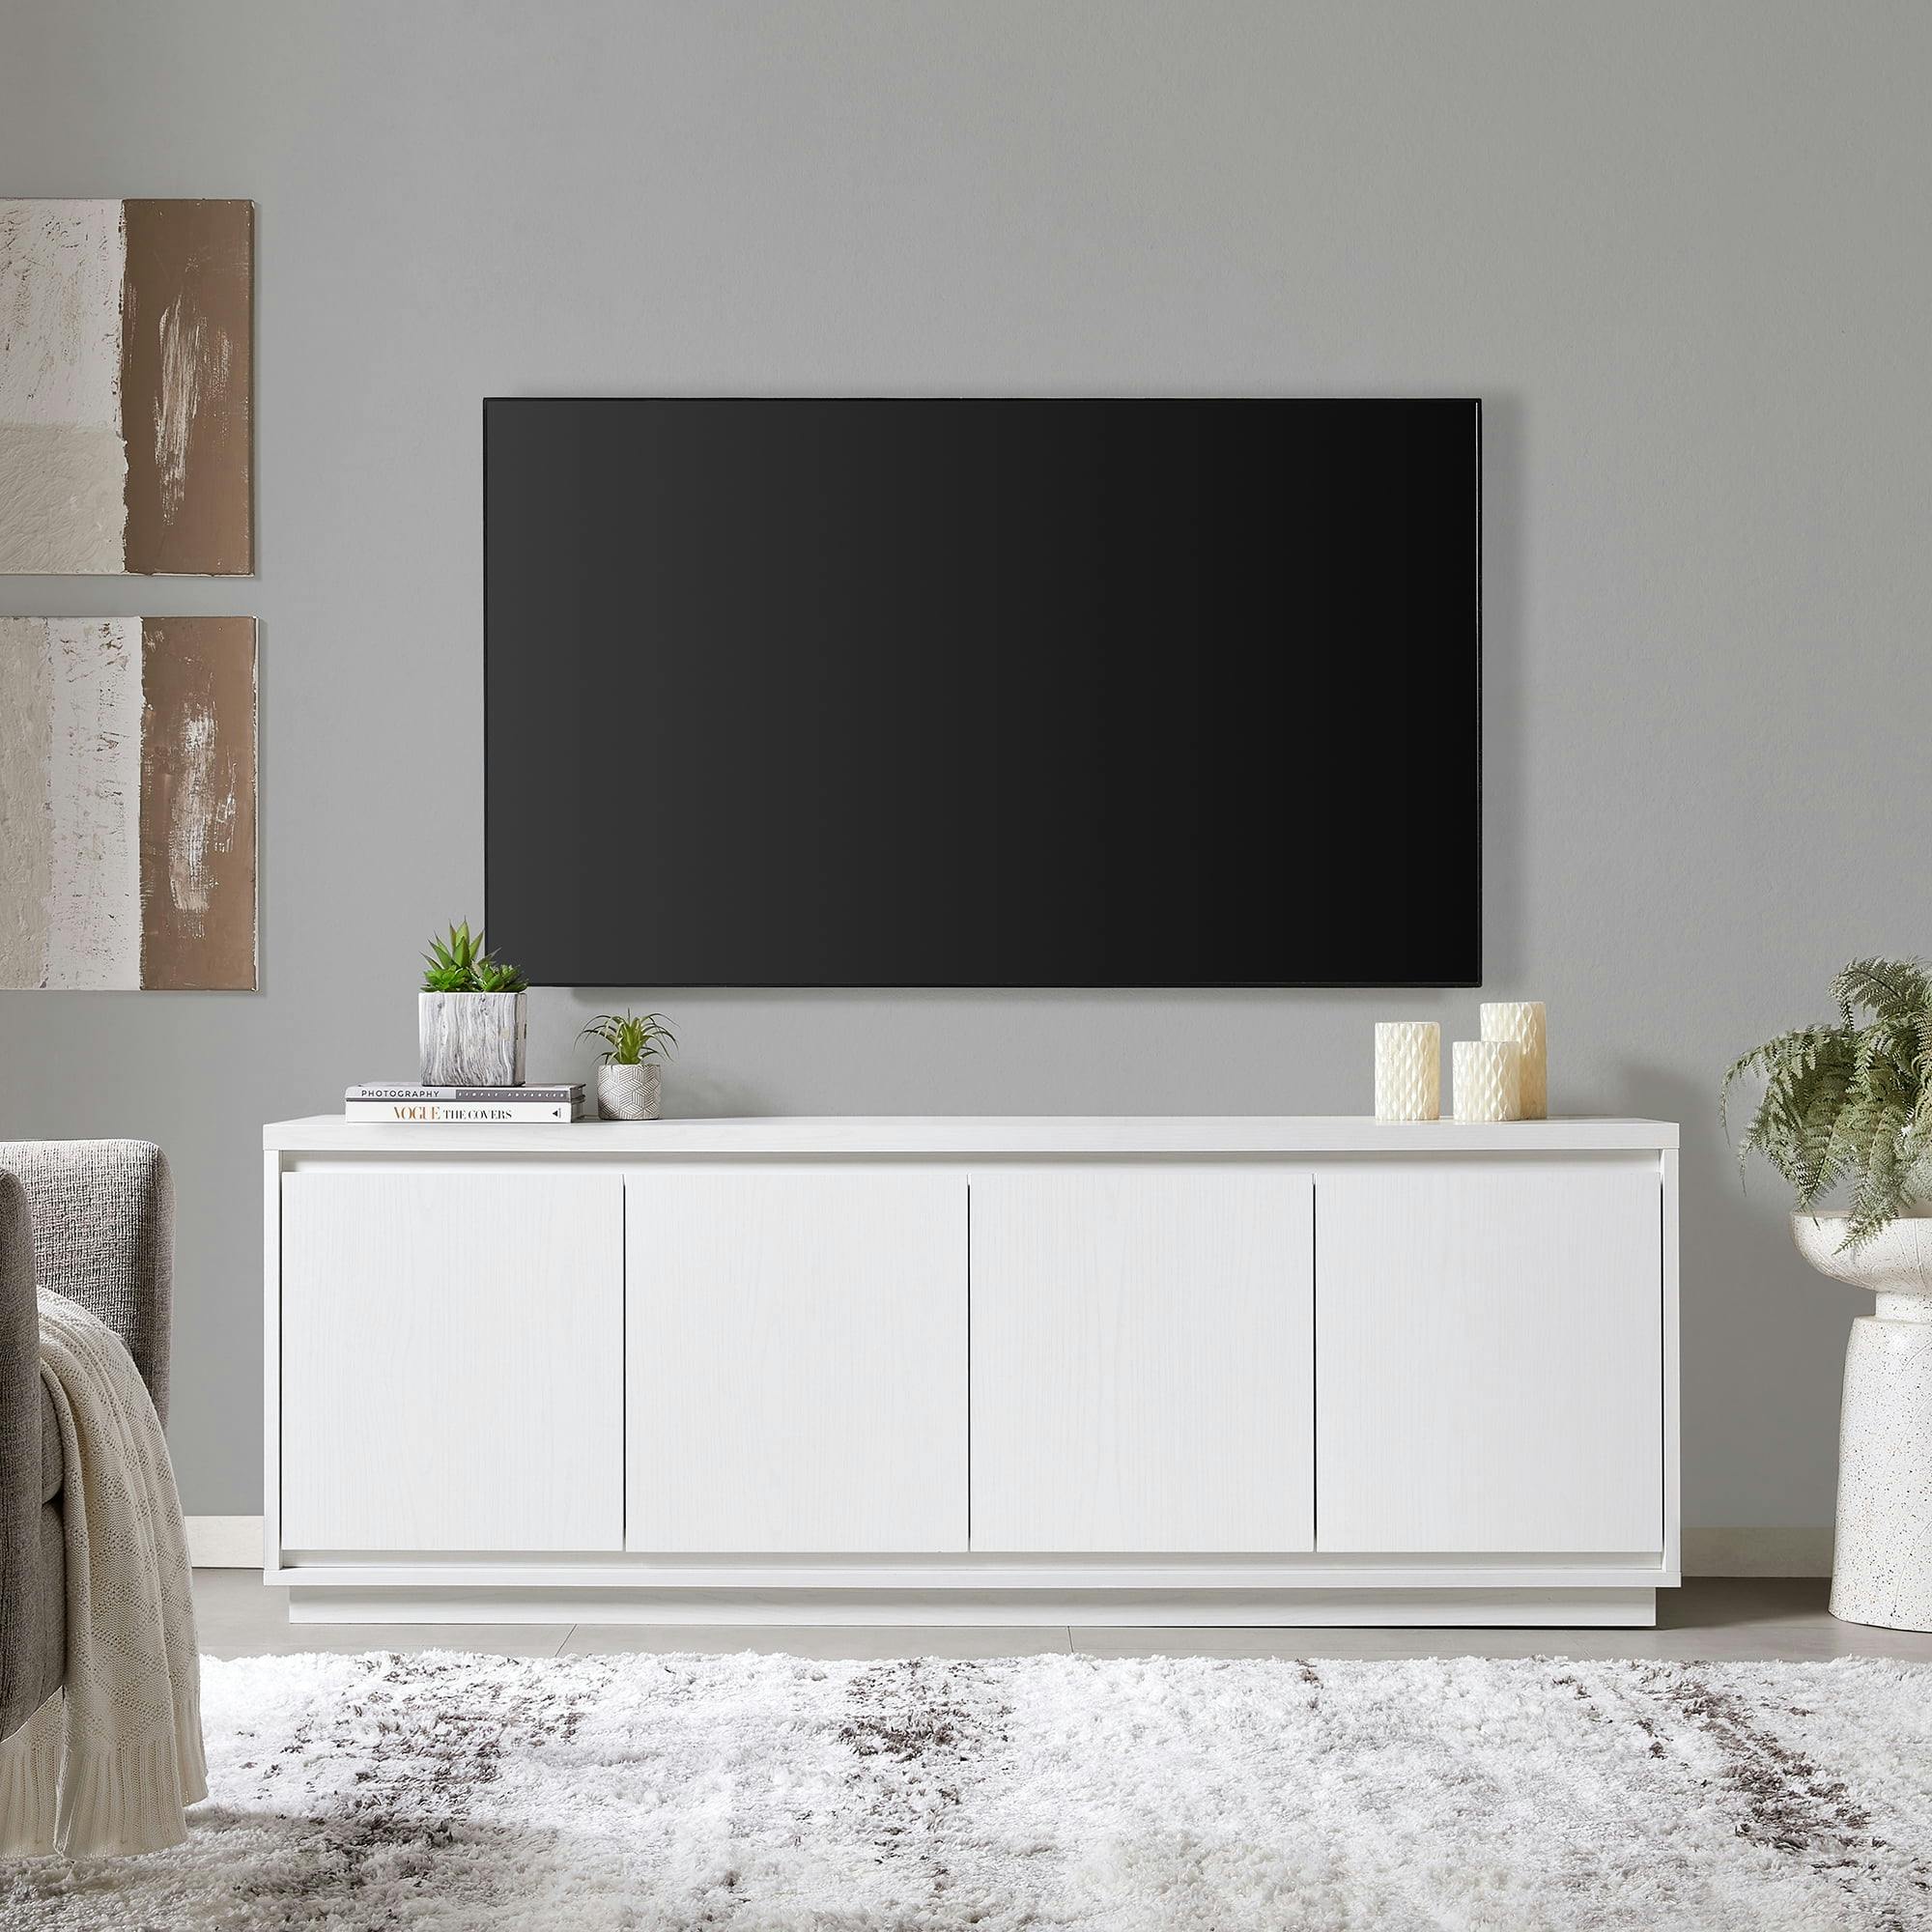 Hanson 70" White Transitional TV Stand with Textured Cabinet Doors